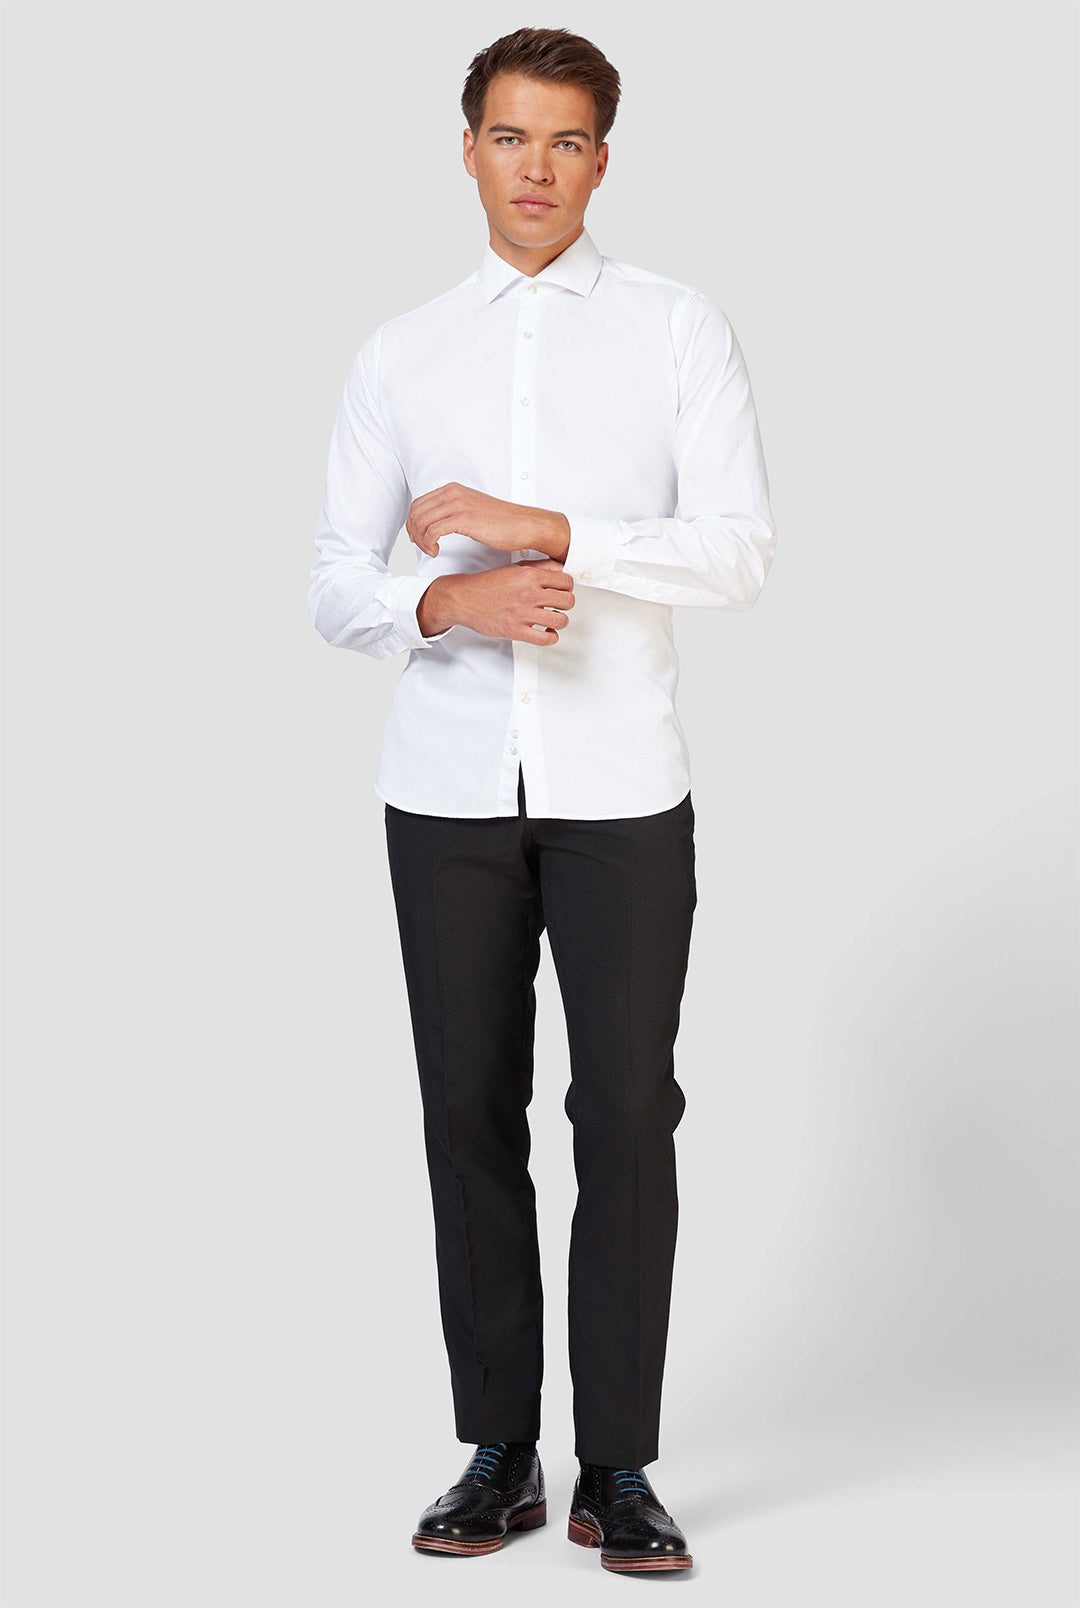 Men''s White Solid Formal Shirt at Rs 1139.40